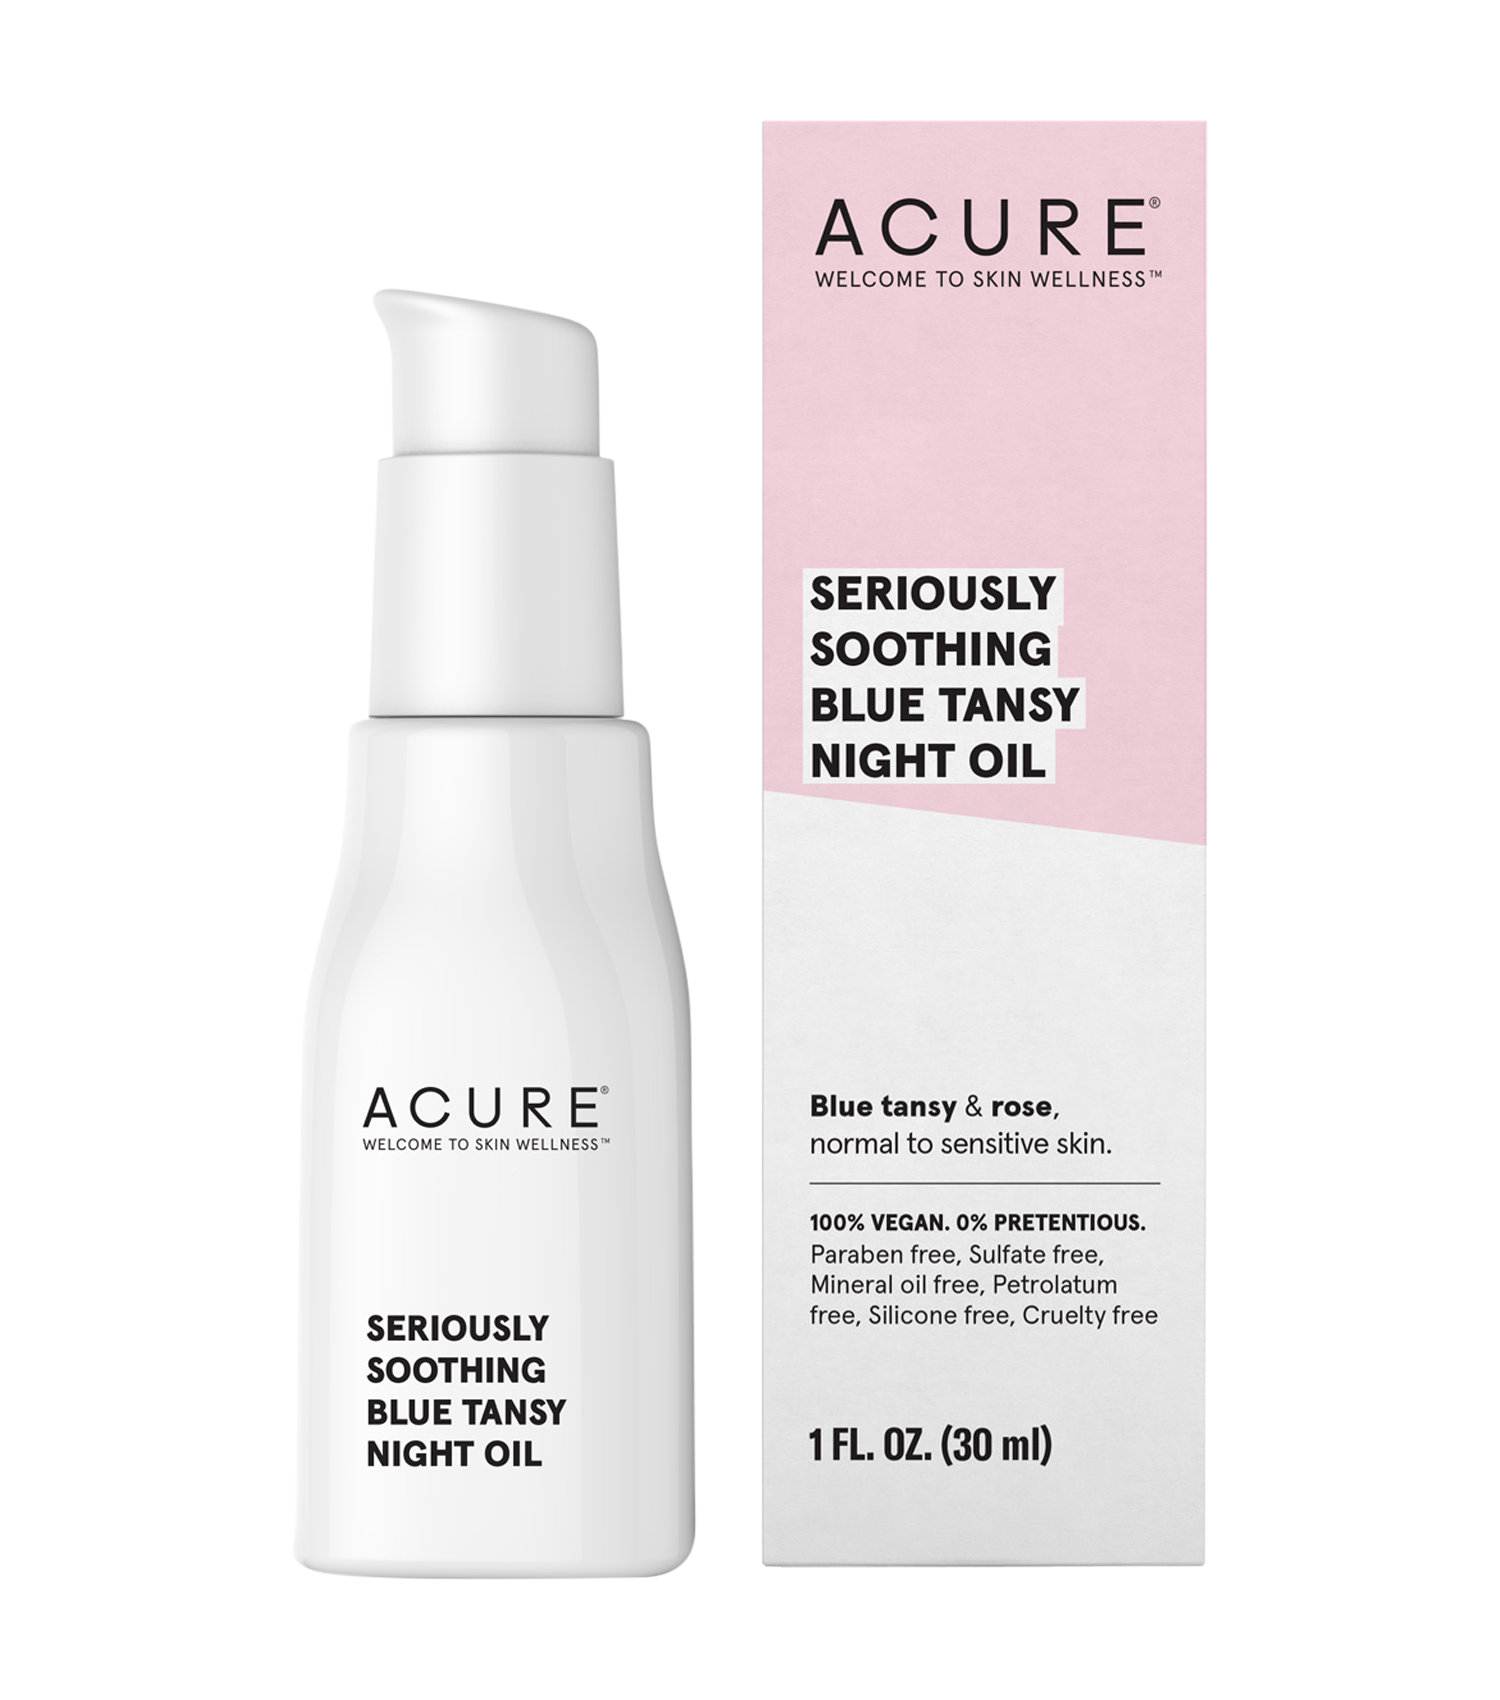 Acure Organics SERIOUSLY SOOTHING BLUE TANSY NIGHT OIL Acure Organics SERIOUSLY SOOTHING BLUE TANSY NIGHT OIL 1